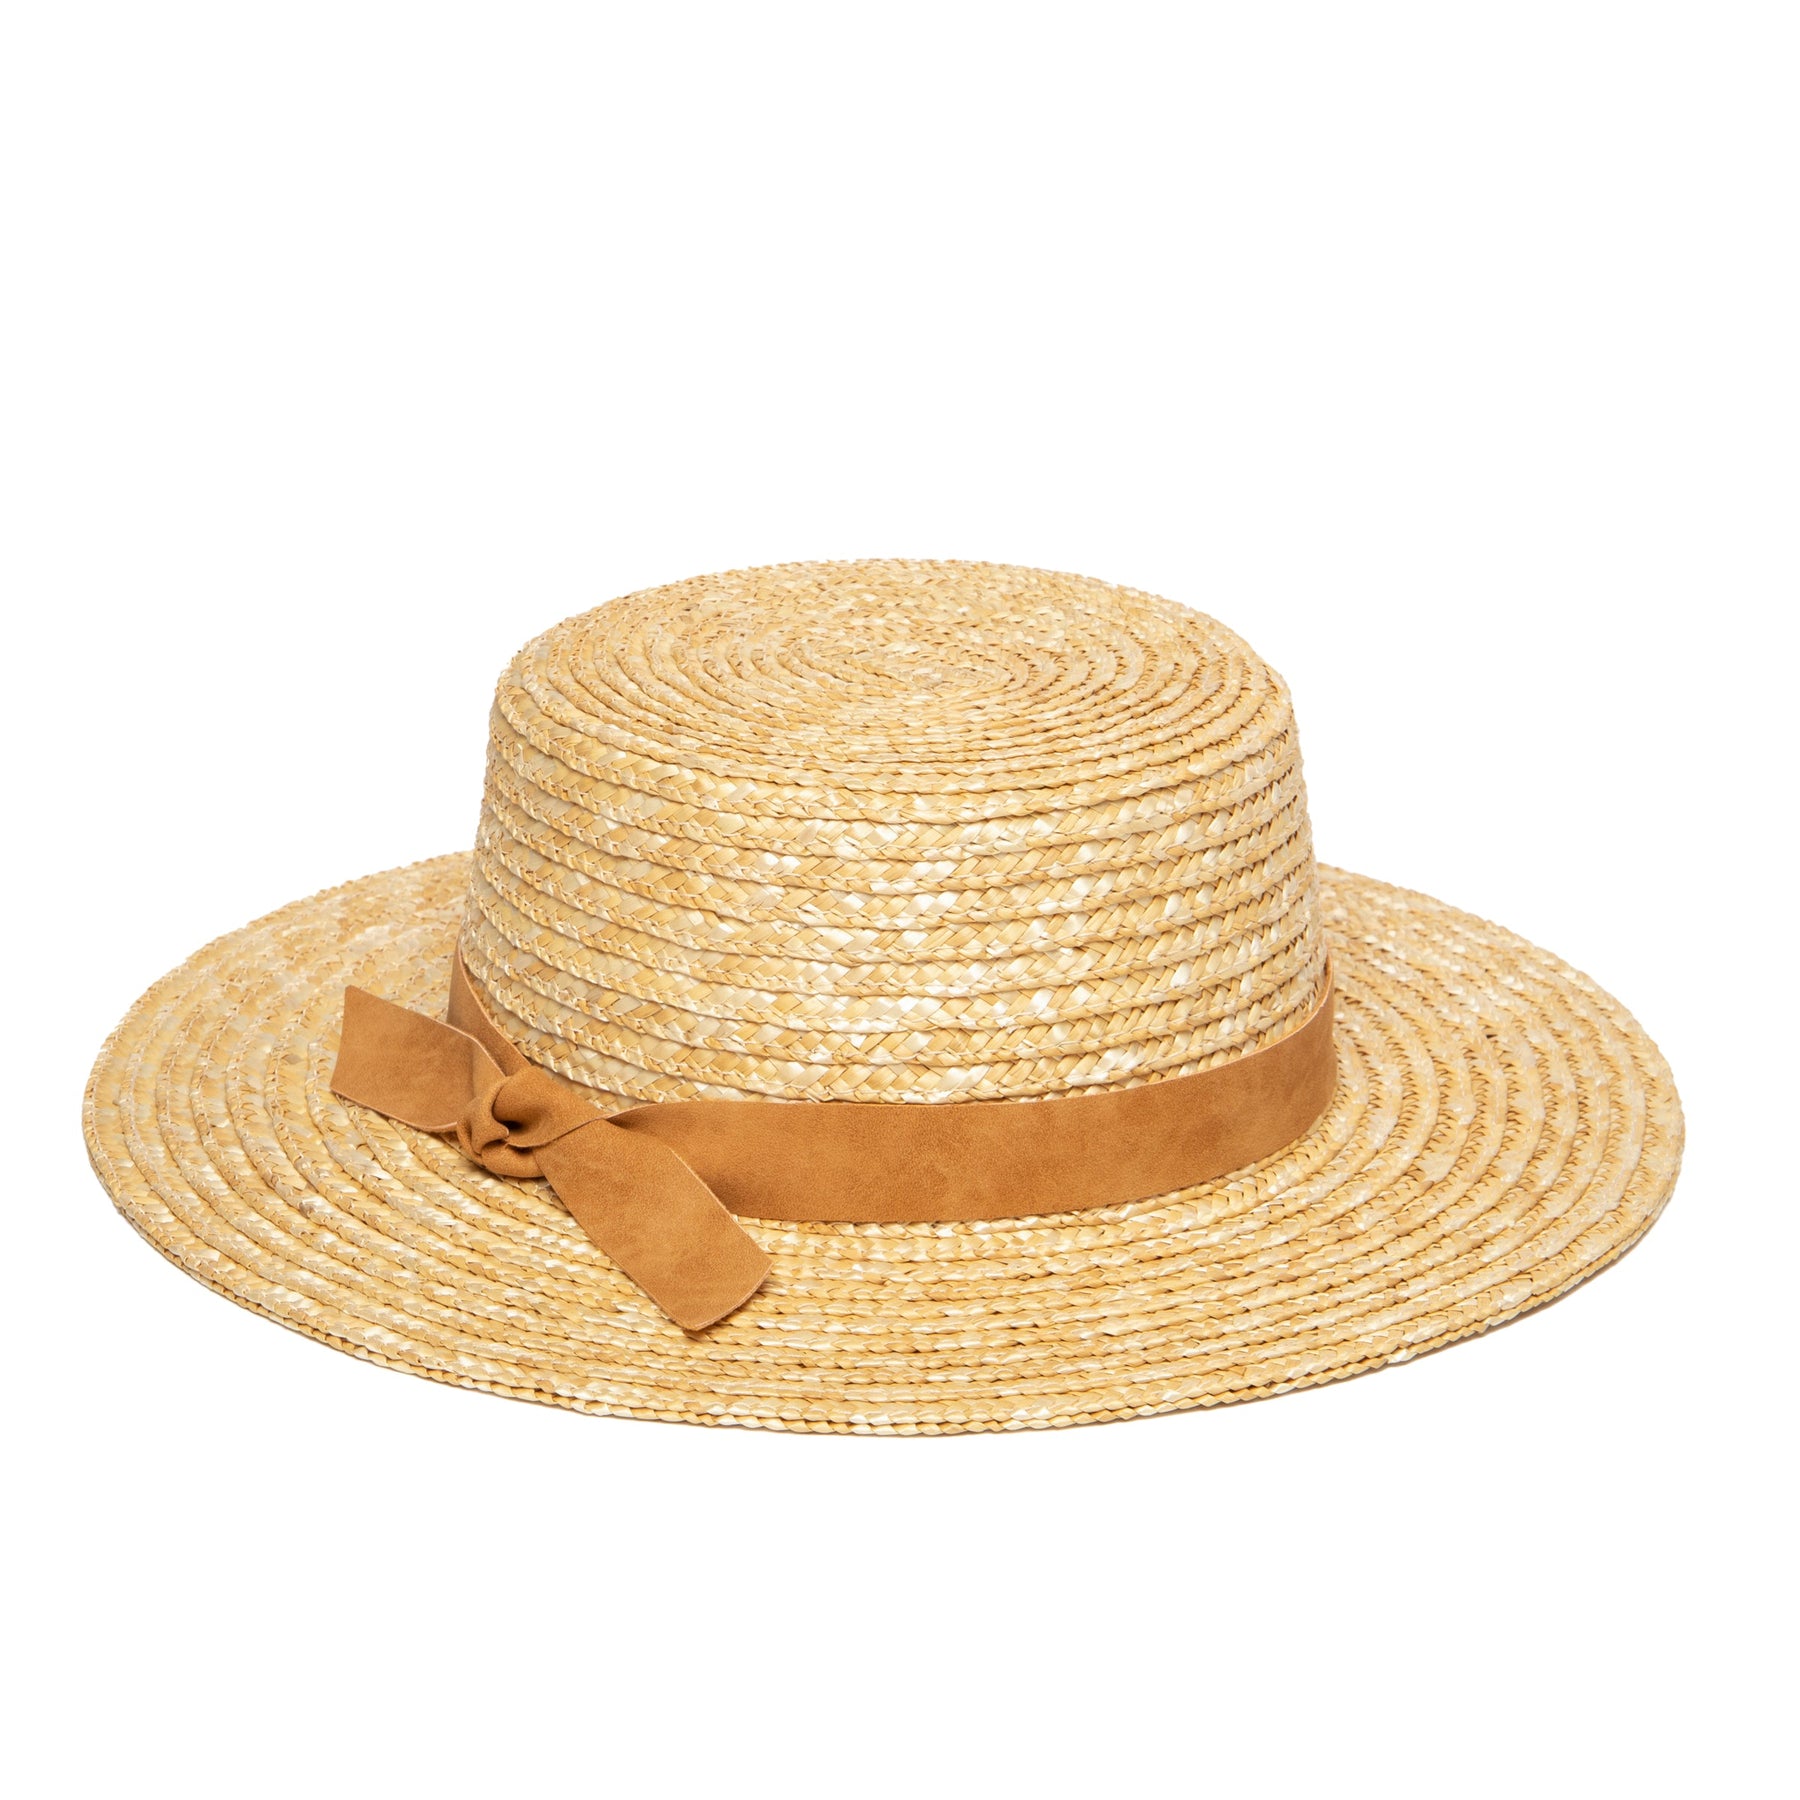 Women's wheat straw boater with faux leather band – San Diego Hat Company